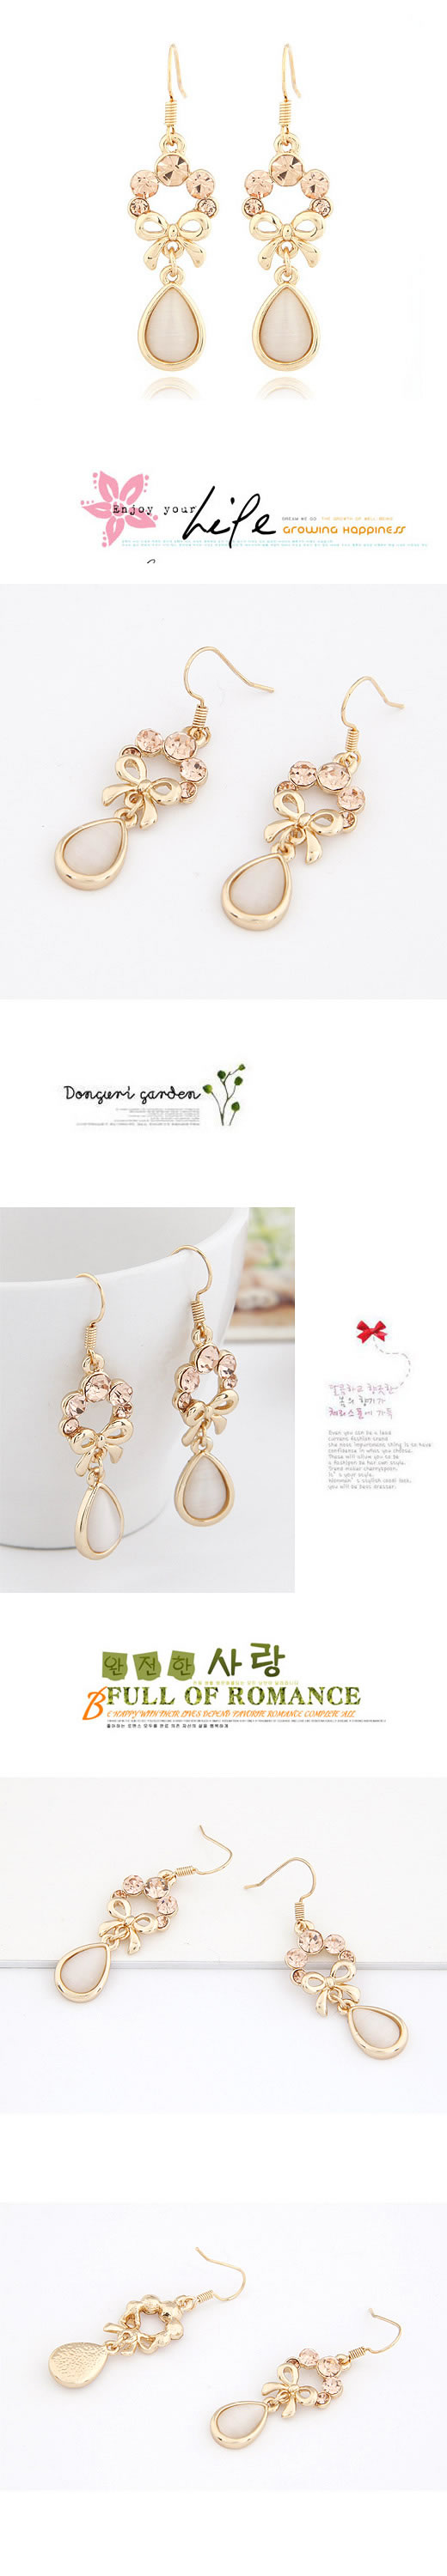 Evil beige White Water Drop Shape Decorated With Cz Dimaond,Drop Earrings